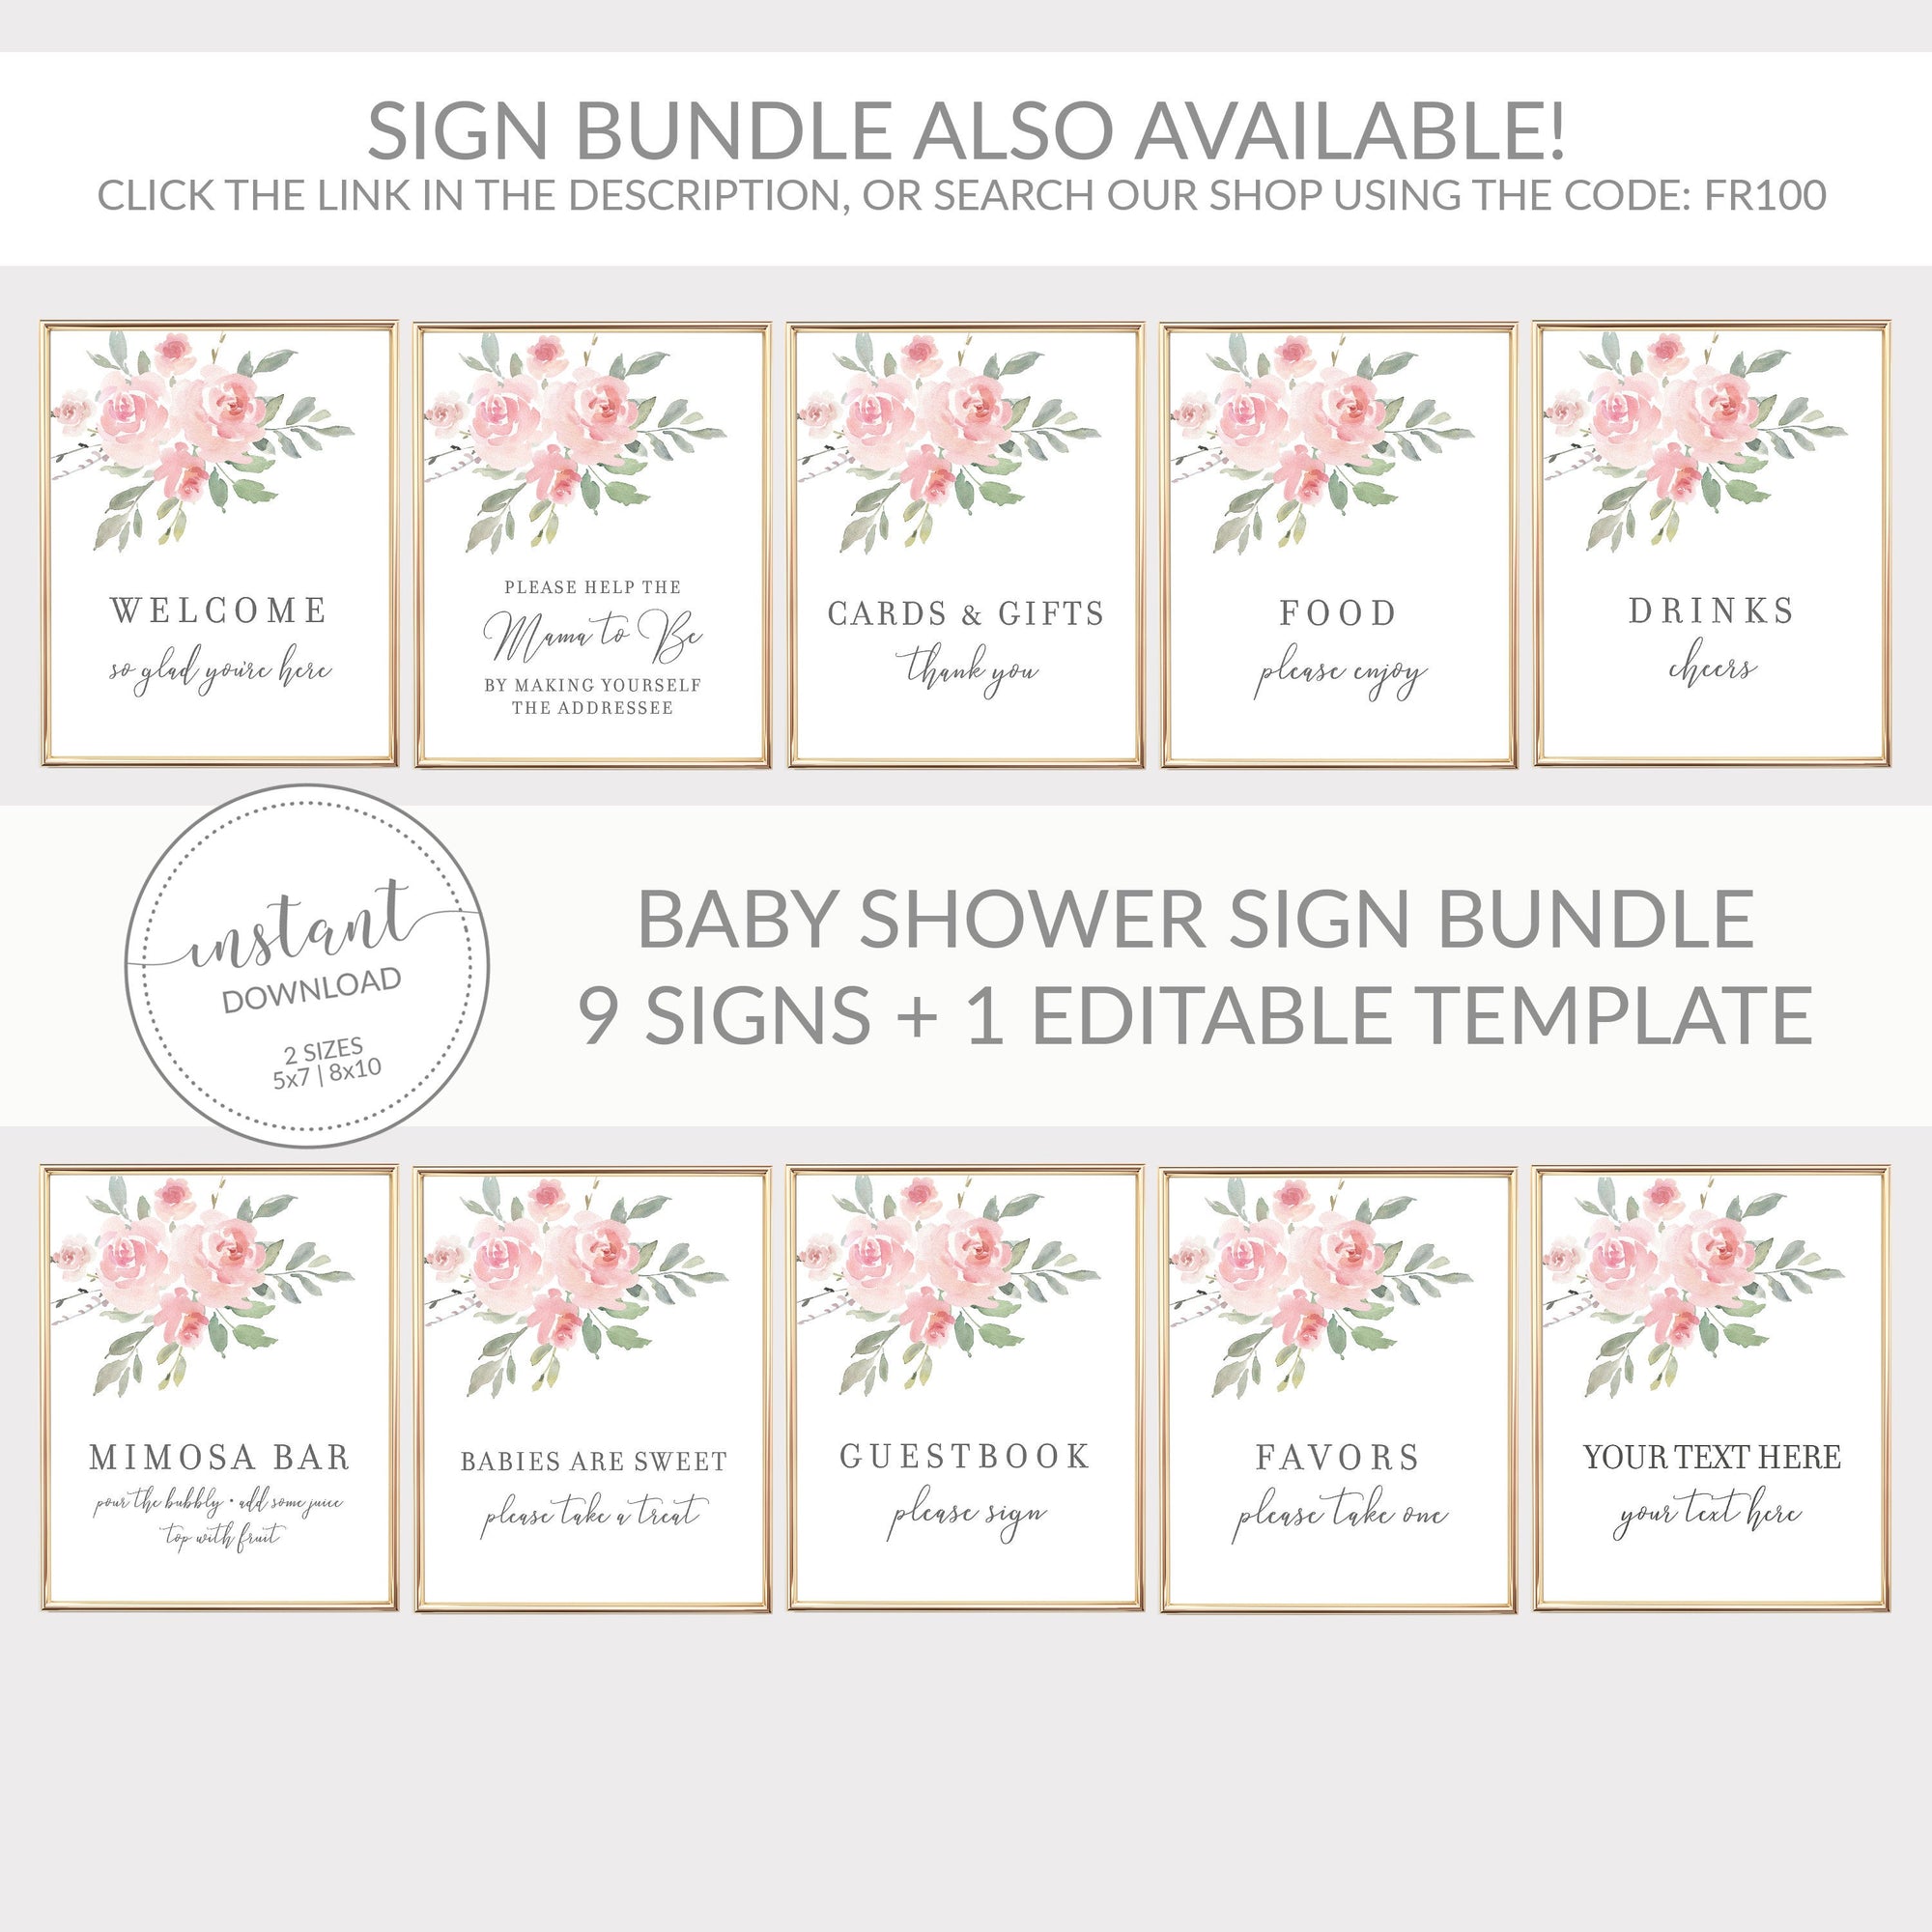 Blush Pink Floral Mimosa Bar Printable Sign INSTANT DOWNLOAD, Birthday, Bridal Shower, Baby Shower, Wedding Decorations and Supplies - FR100 - @PlumPolkaDot 